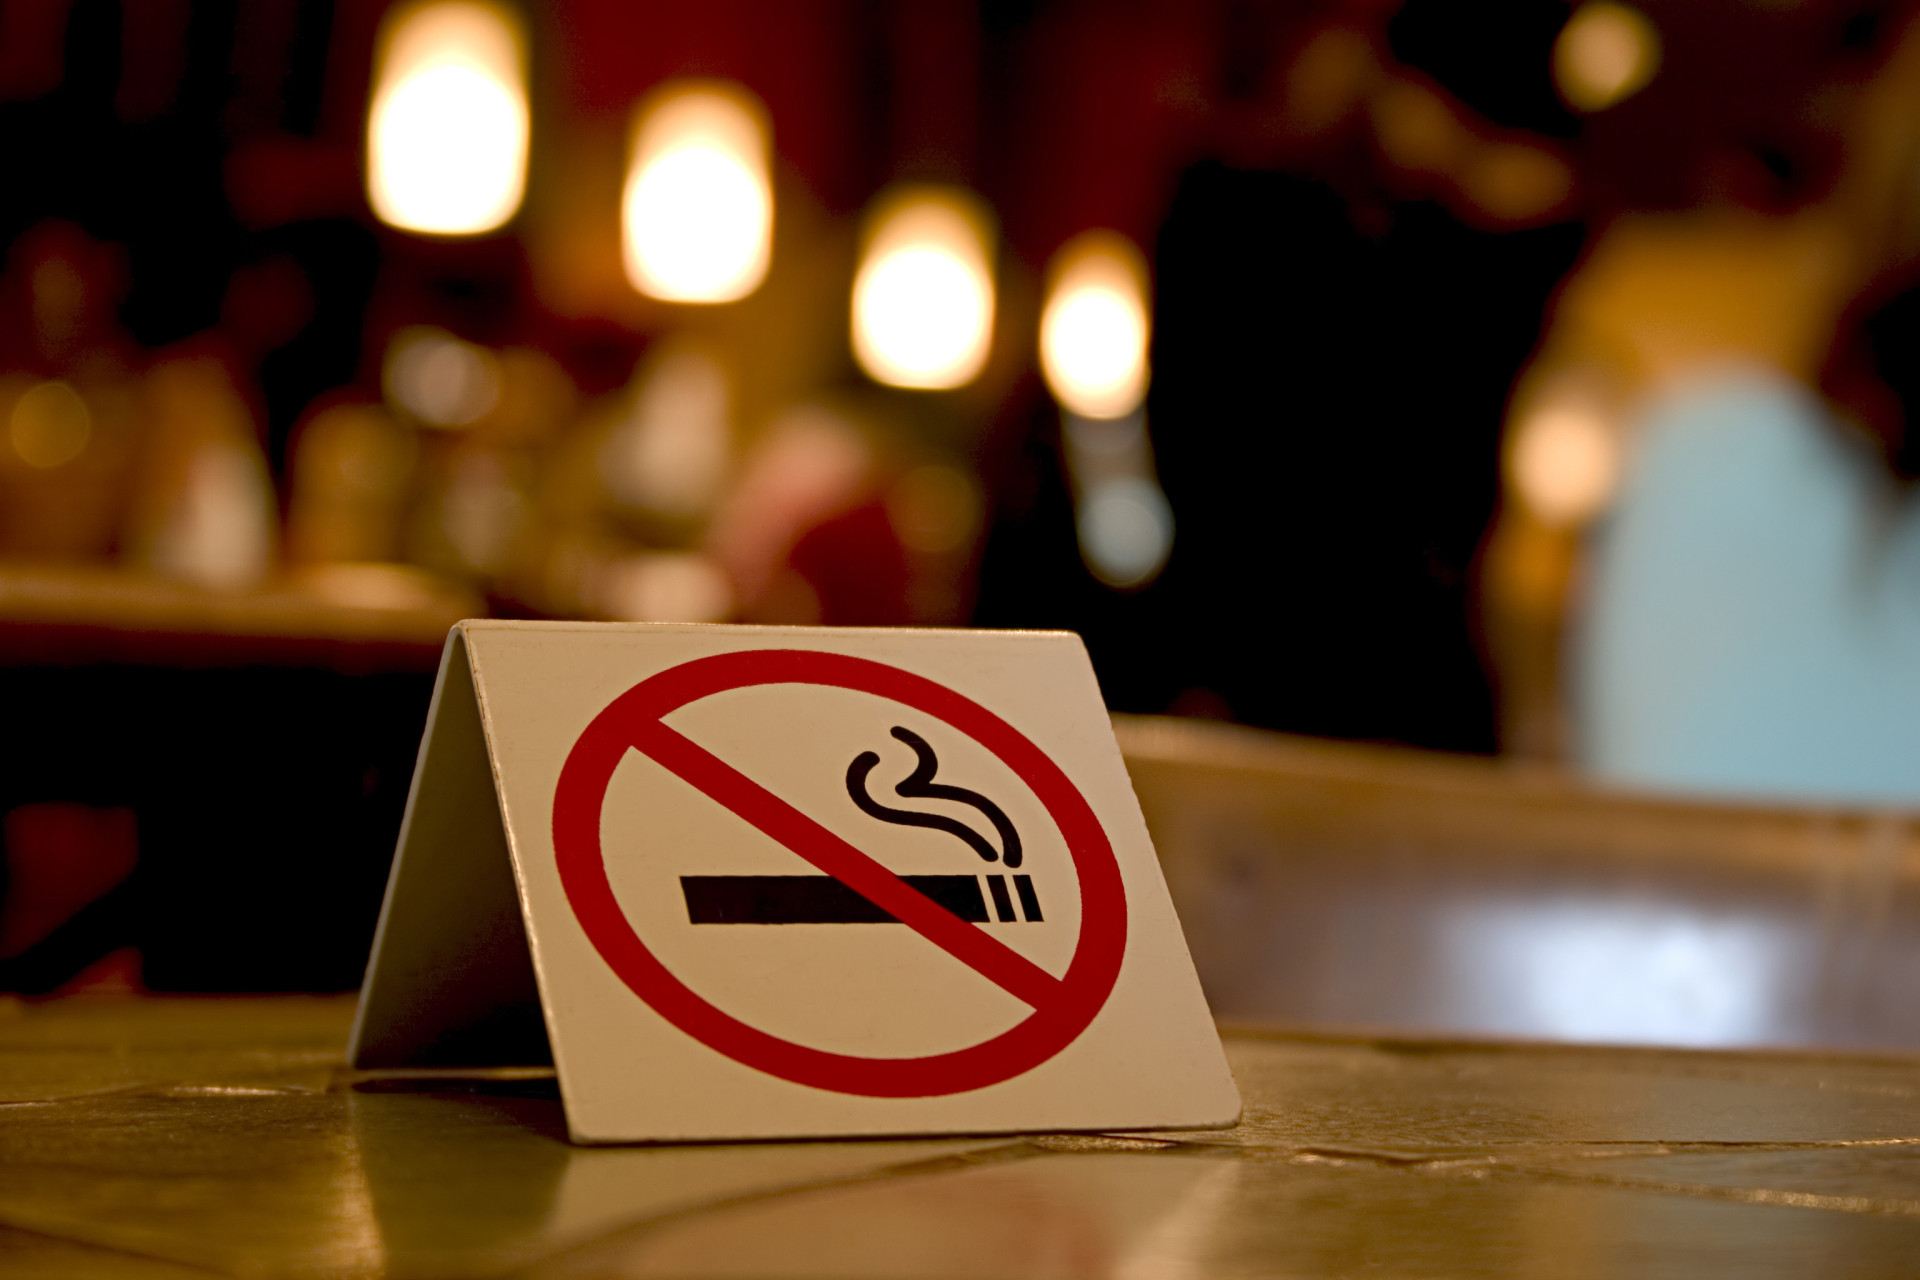 Just because you're in another country doesn't mean you can smoke indoors. This is a universal symbol and must be respected.<p><a href="https://www.msn.com/en-us/community/channel/vid-7xx8mnucu55yw63we9va2gwr7uihbxwc68fxqp25x6tg4ftibpra?cvid=94631541bc0f4f89bfd59158d696ad7e">Follow us and access great exclusive content every day</a></p>